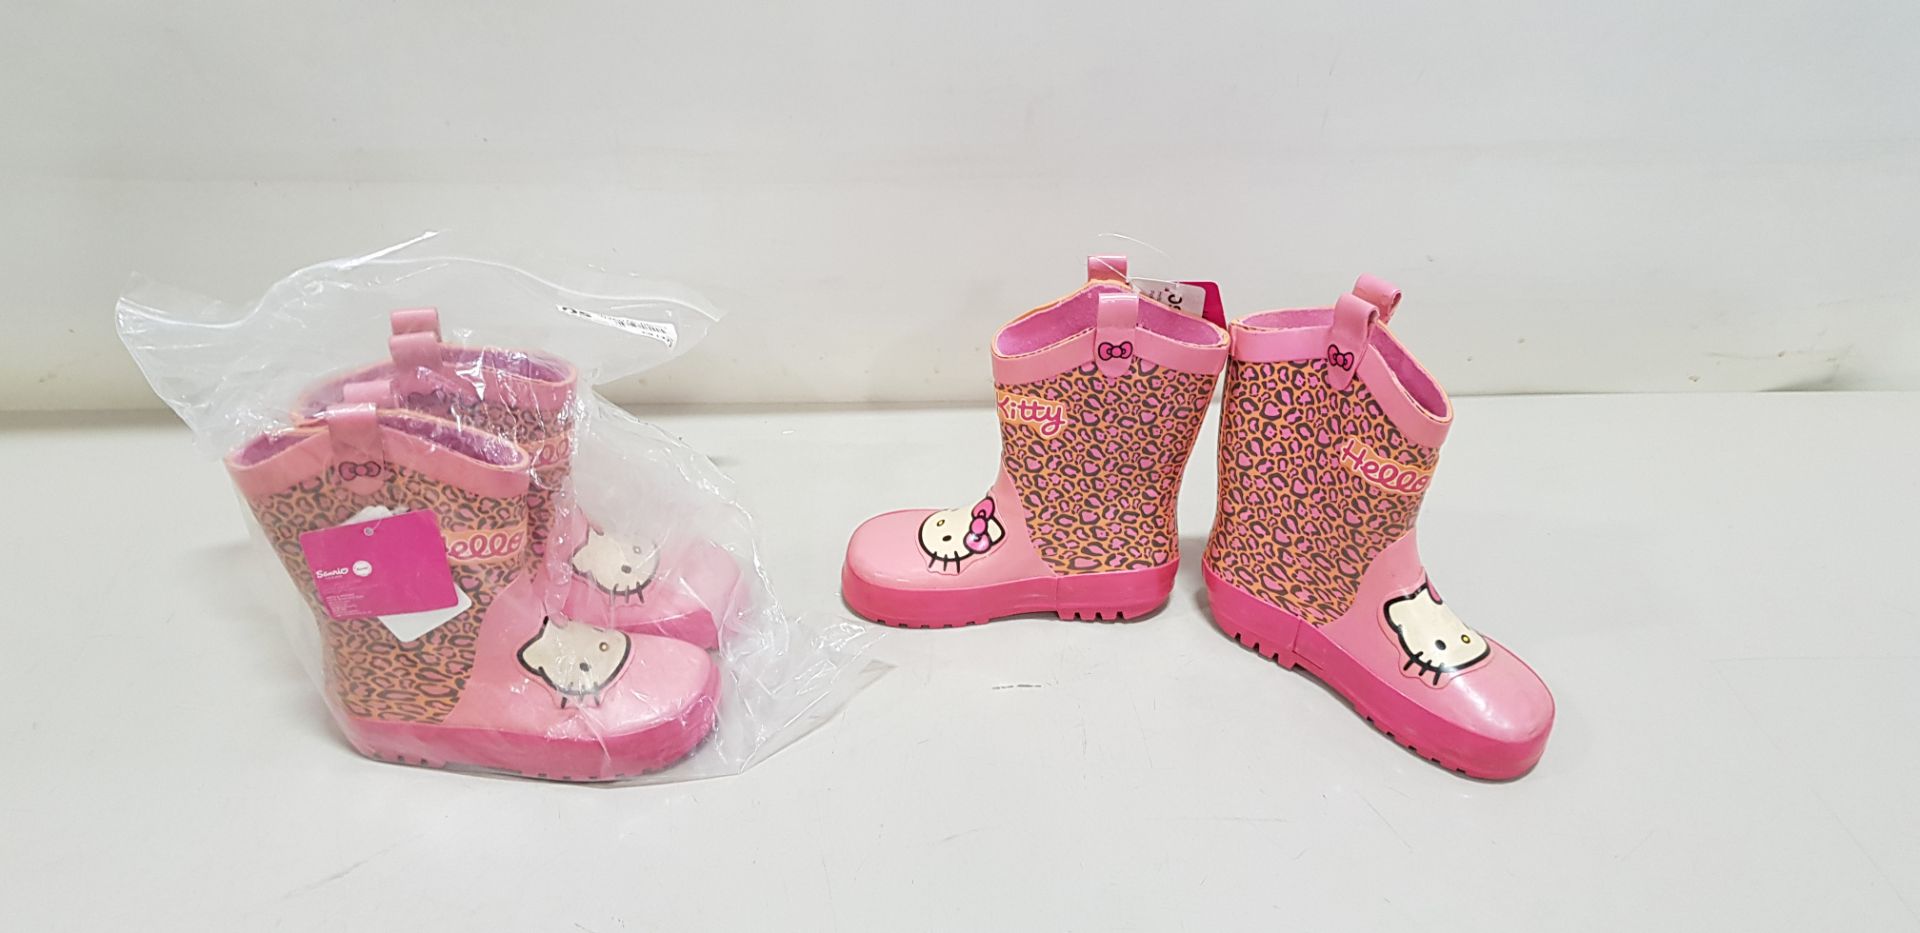 35 X BRAND NEW HELLO KITTY PINK/ ORANGE WELLIES SIZE C9 RRP £19.00 (TOTAL RRP £665.00)